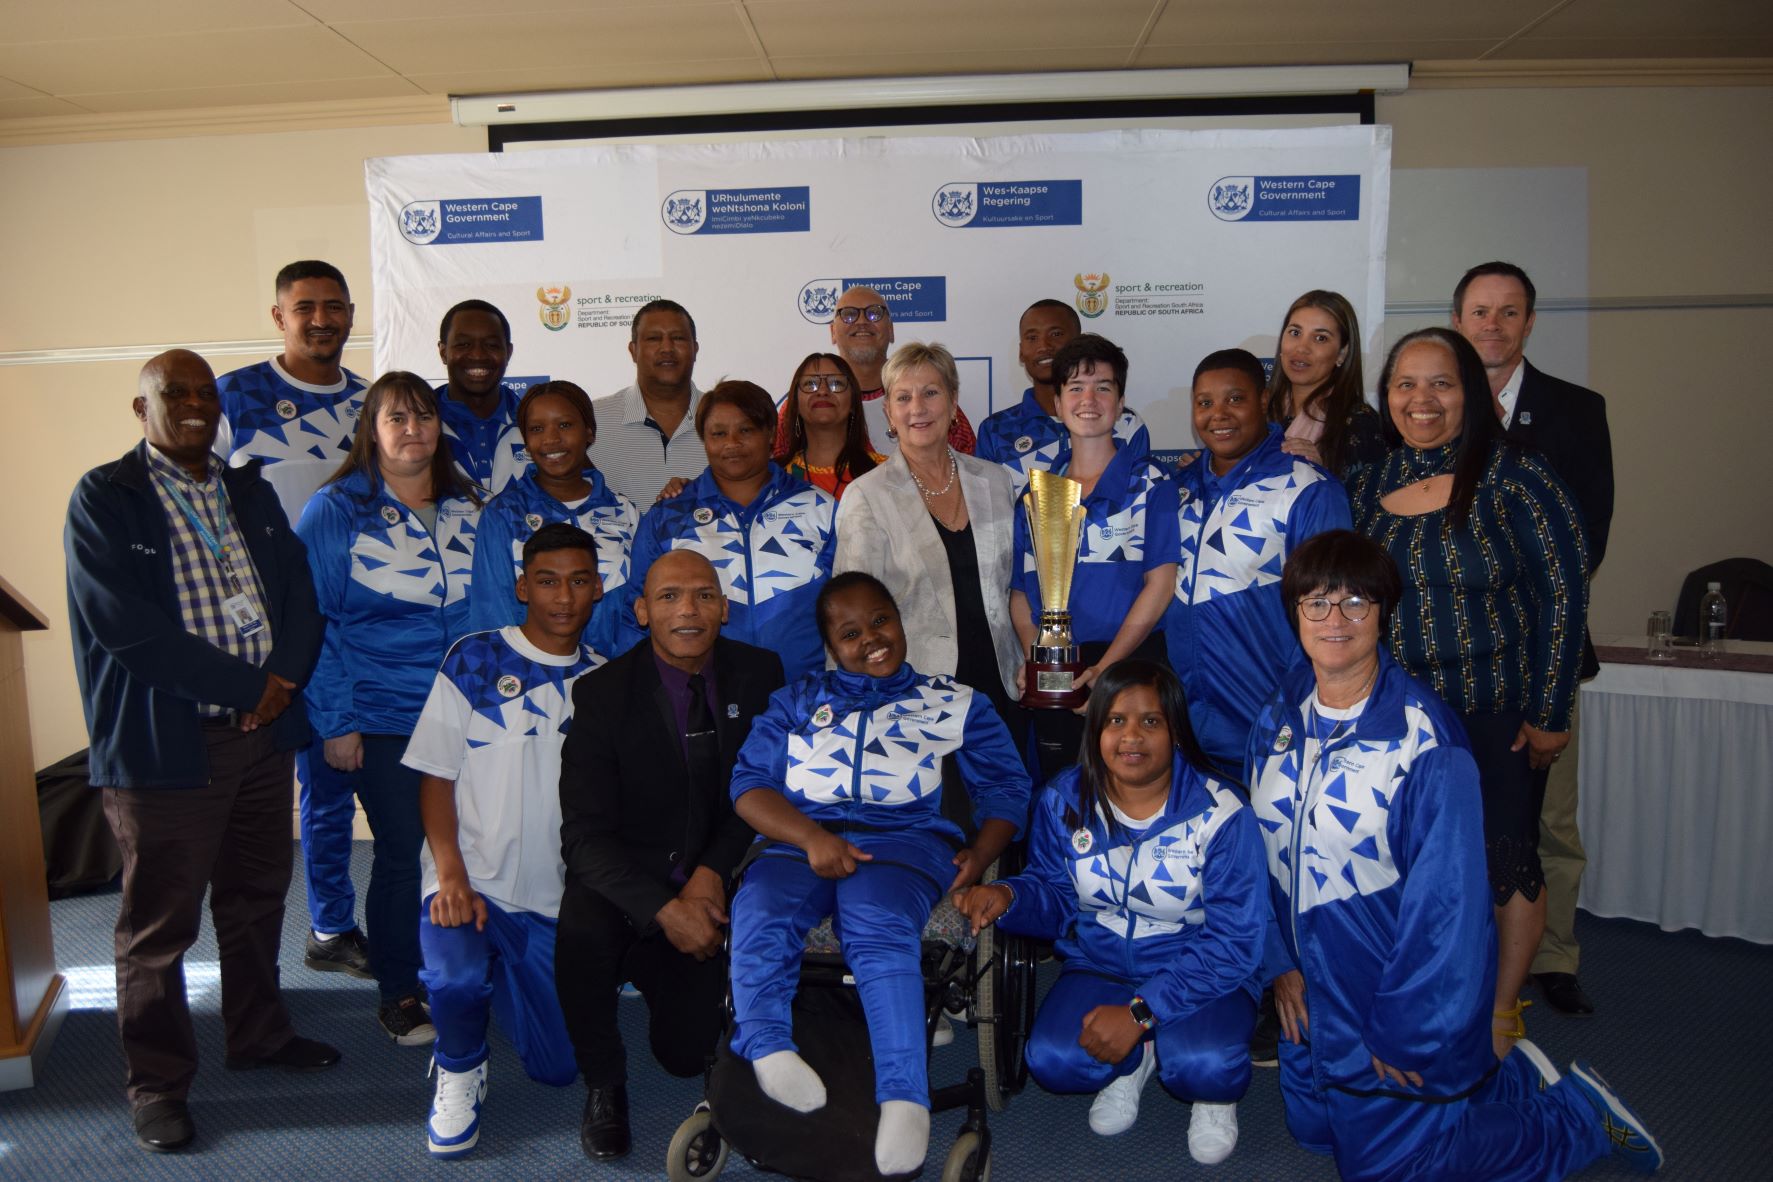 The Team from the Summer Games with Minister Marais.